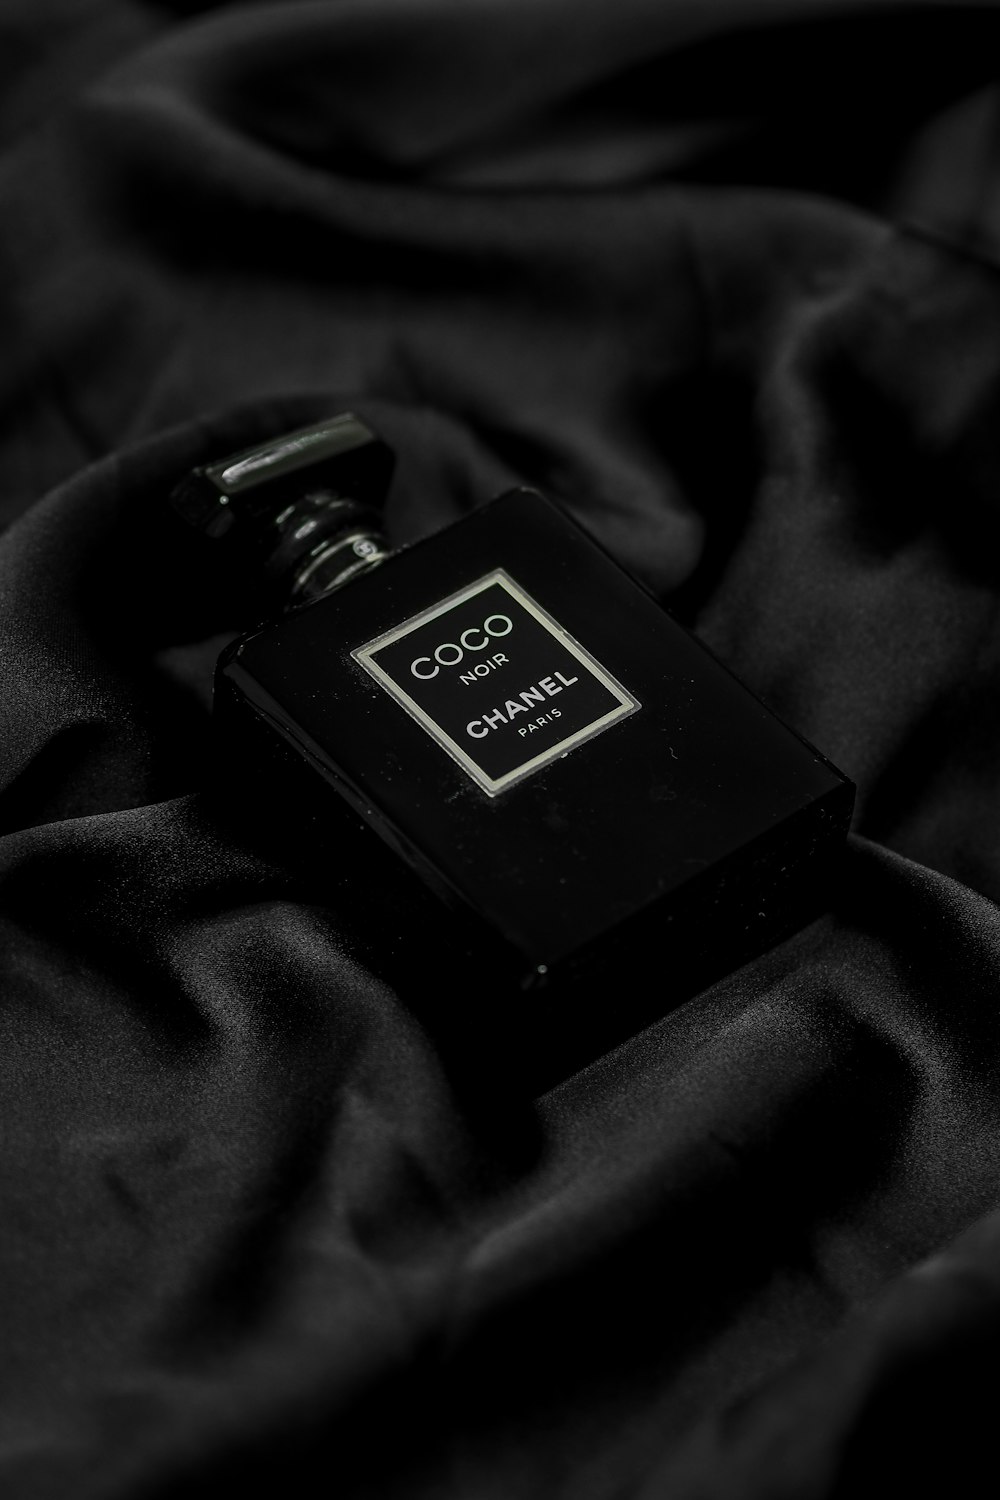 black and gold perfume bottle